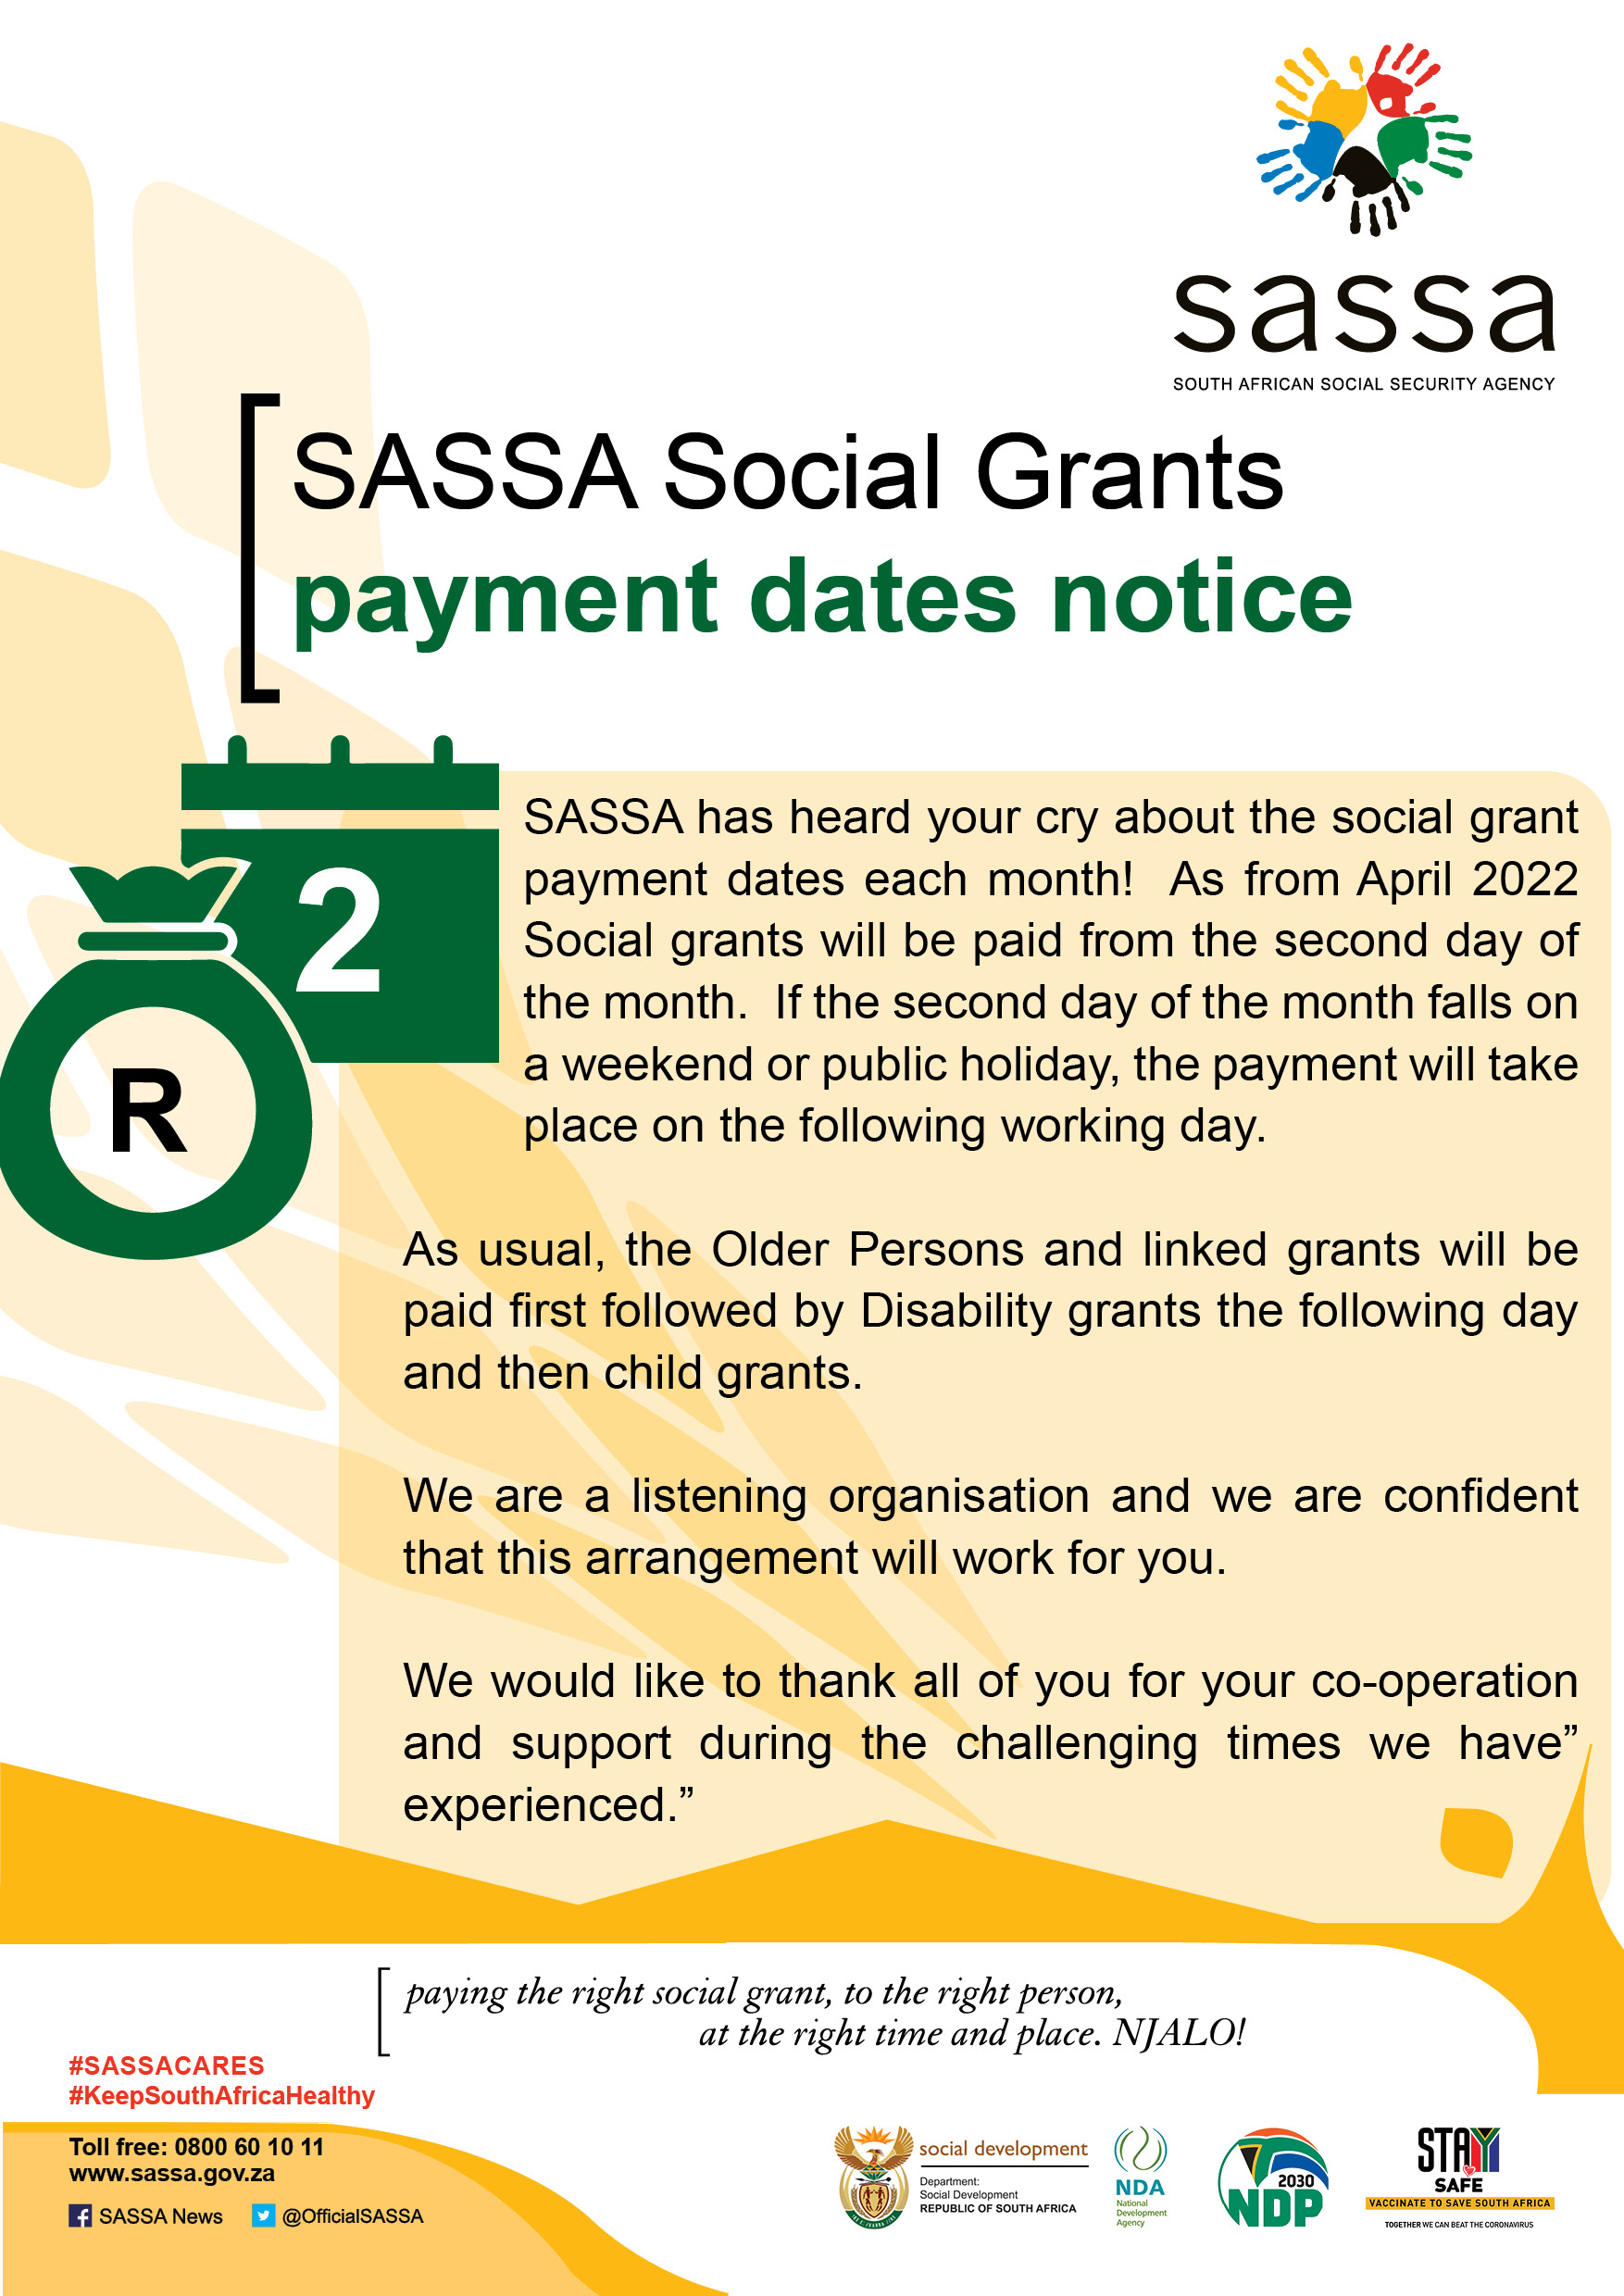 Early SASSA r350 Grant Payment to Commence April